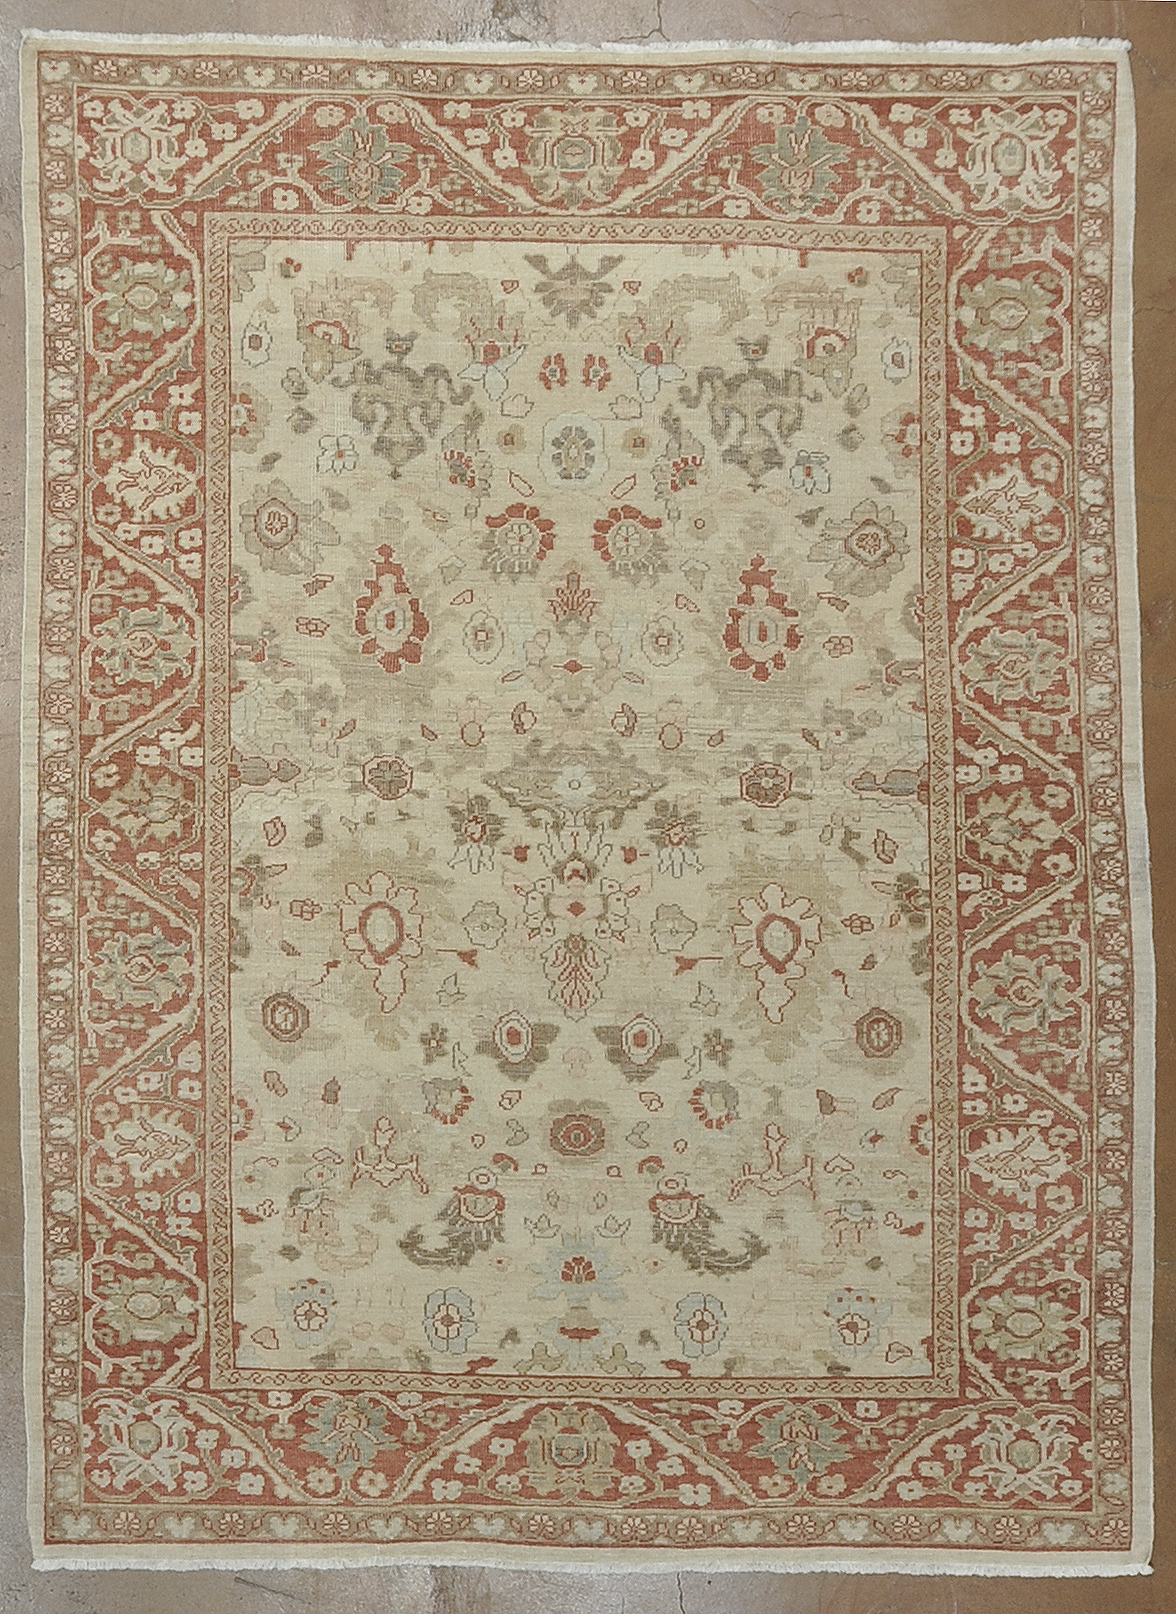 Original Ziegler & Co Sultanabad rugs and more -